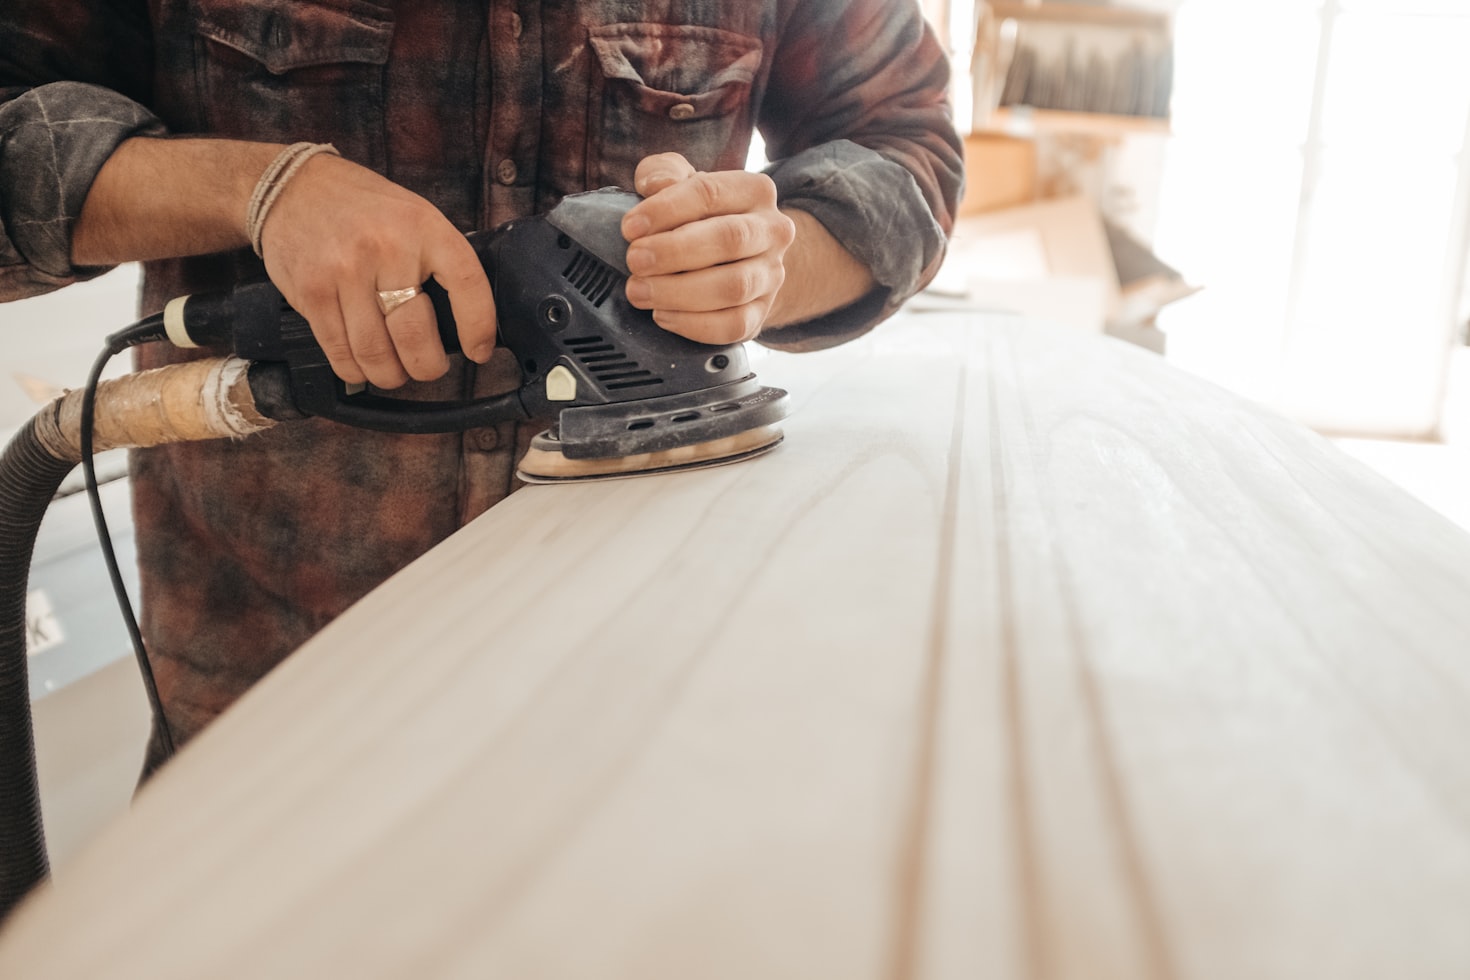 A person using a circular sander on a piece of wood.